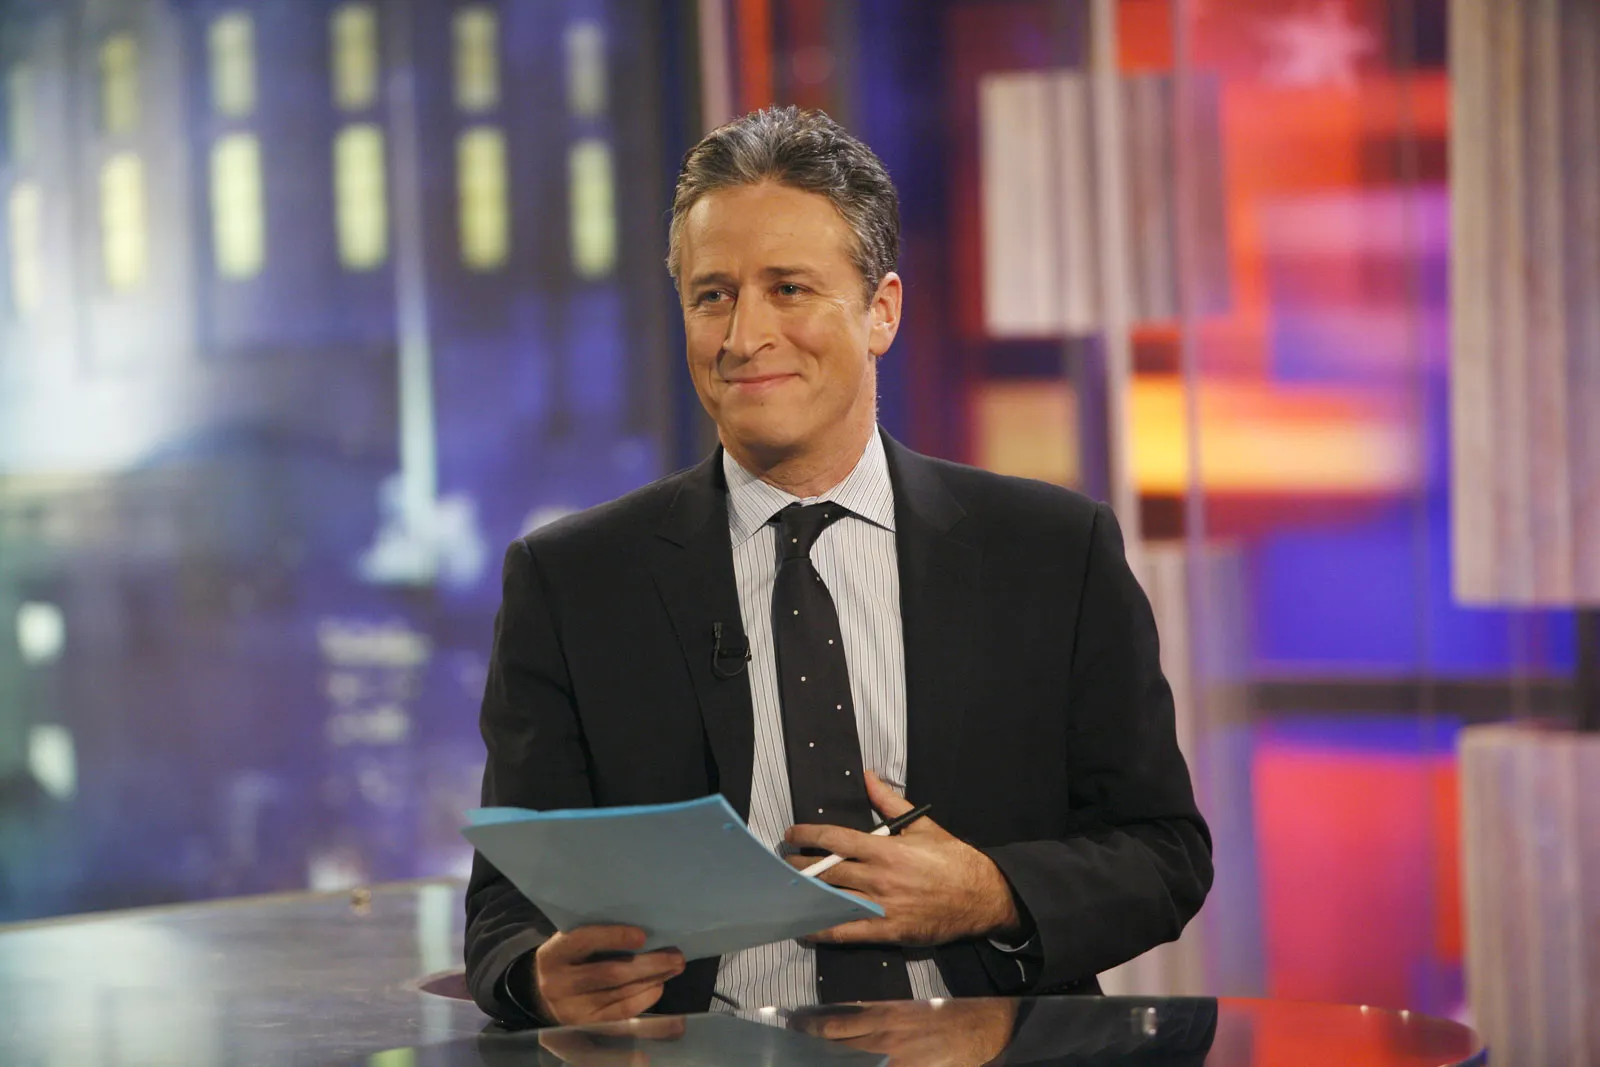 Where To Watch The Daily Show with Jon Stewart Online